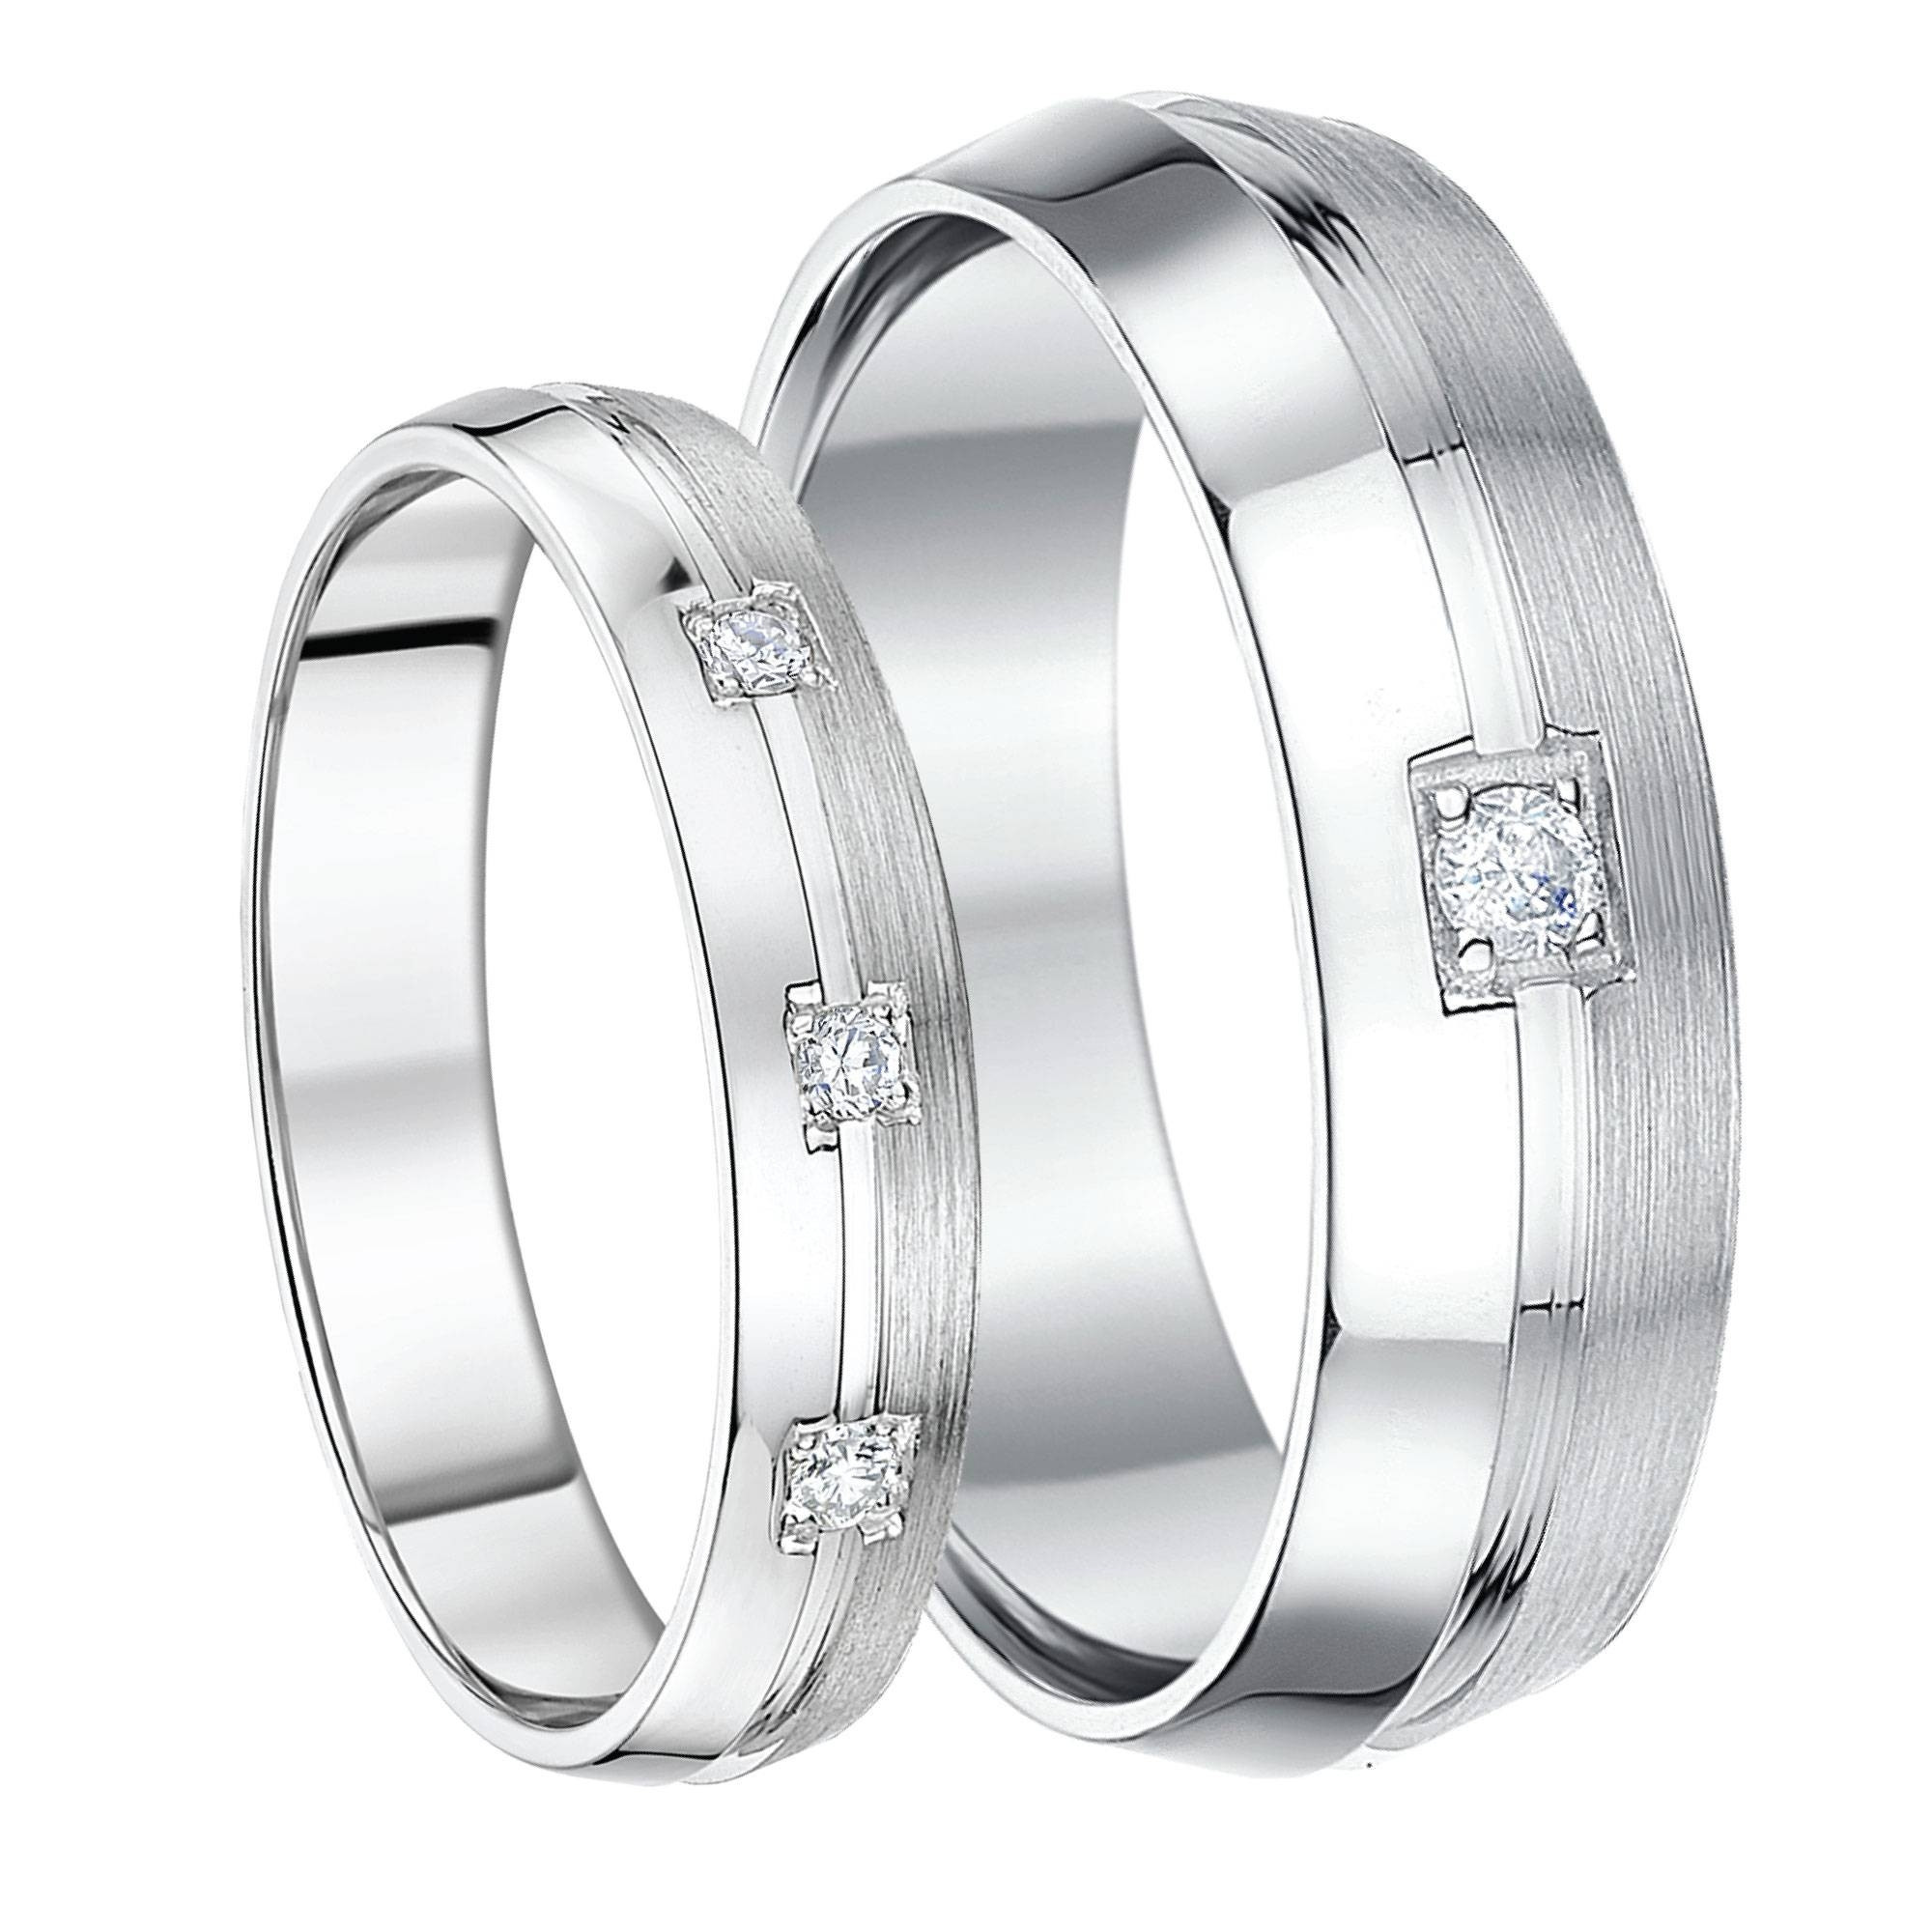 Cheap Wedding Ring Sets For Bride And Groom
 15 Best of White Gold Wedding Bands His And Hers